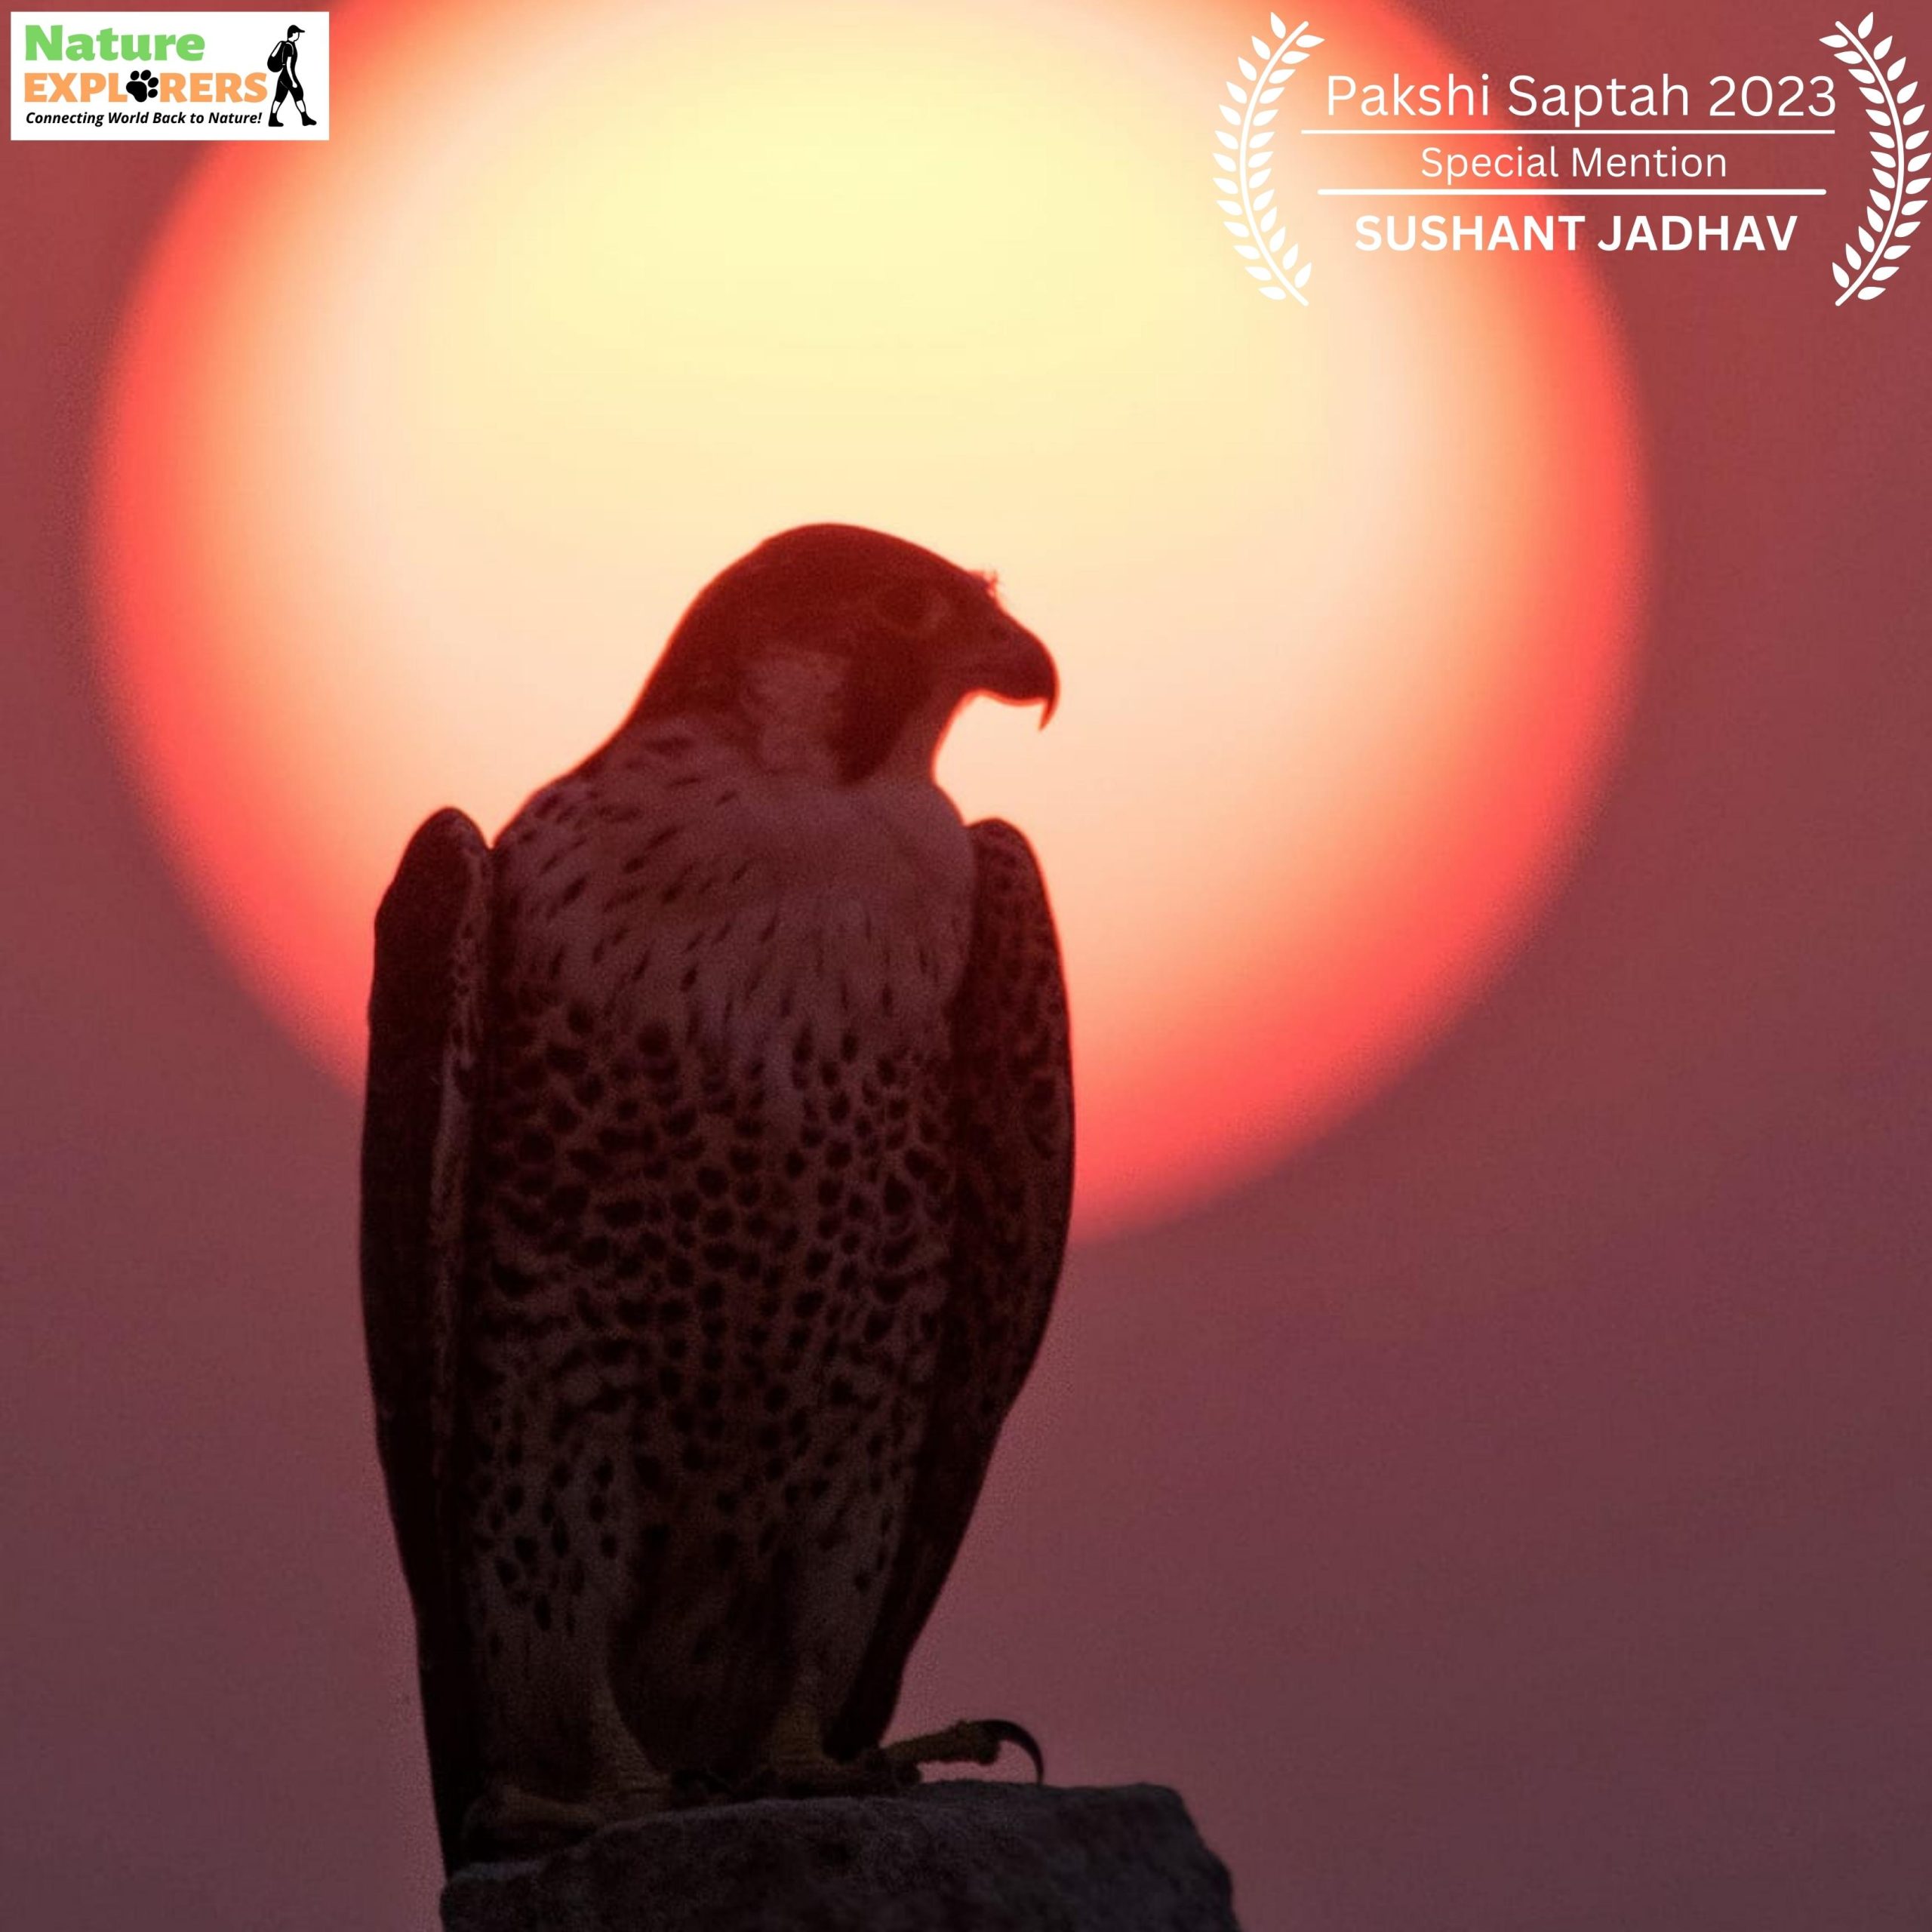 PEREGRINE FALCON WITH SUNSET BACKDROP